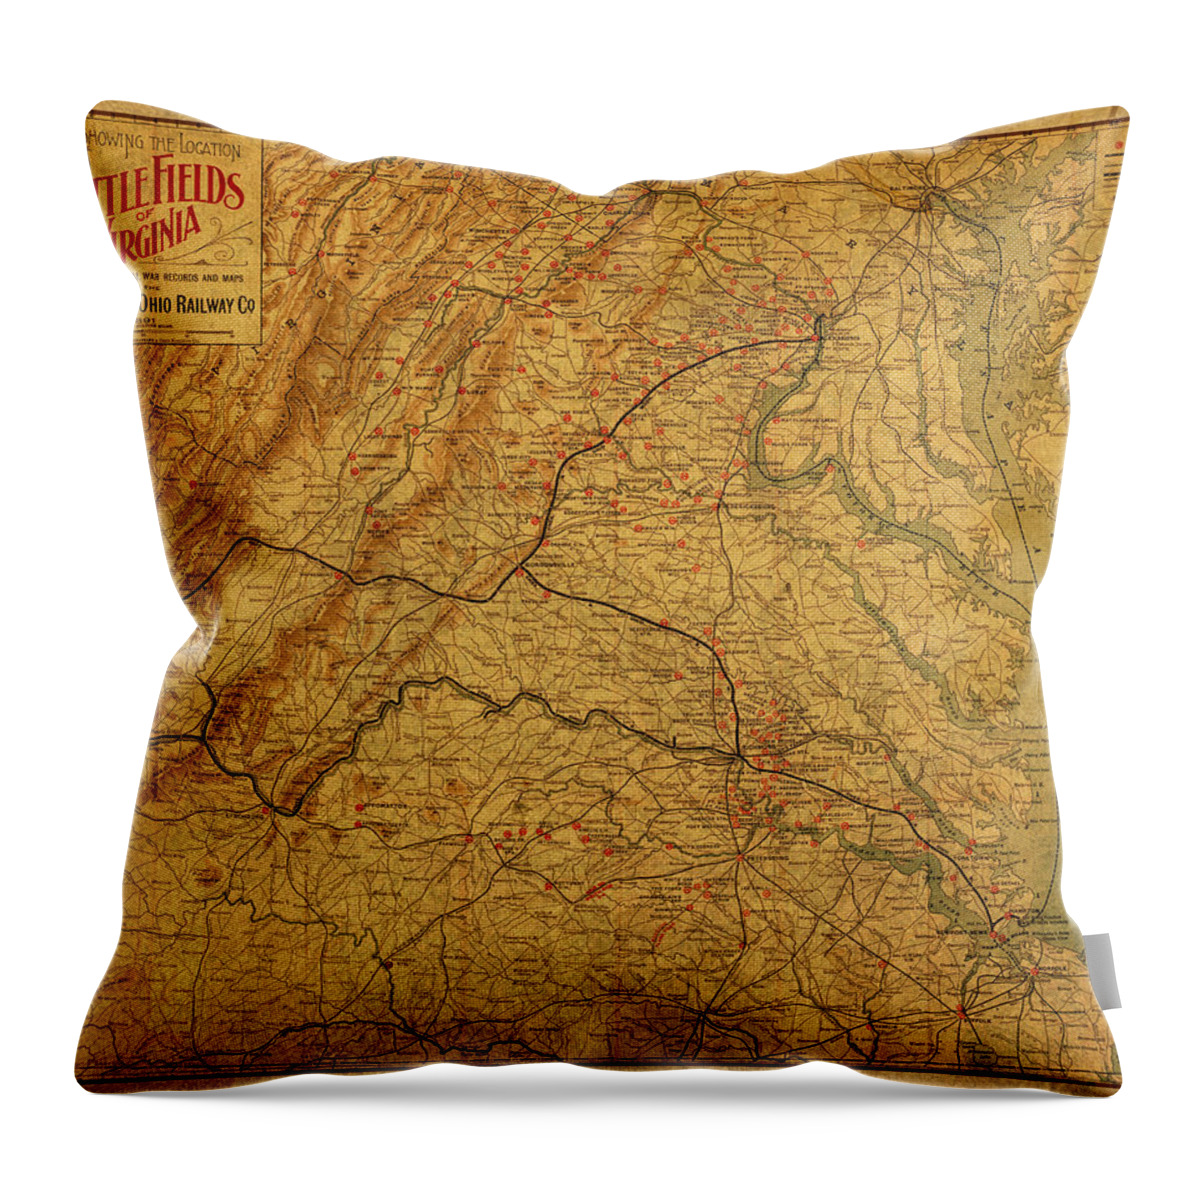 Map Of Virginia Throw Pillow featuring the mixed media Map of Virginia Battlefields Civil War Circa 1892 on Worn Distressed Vintage Canvas by Design Turnpike